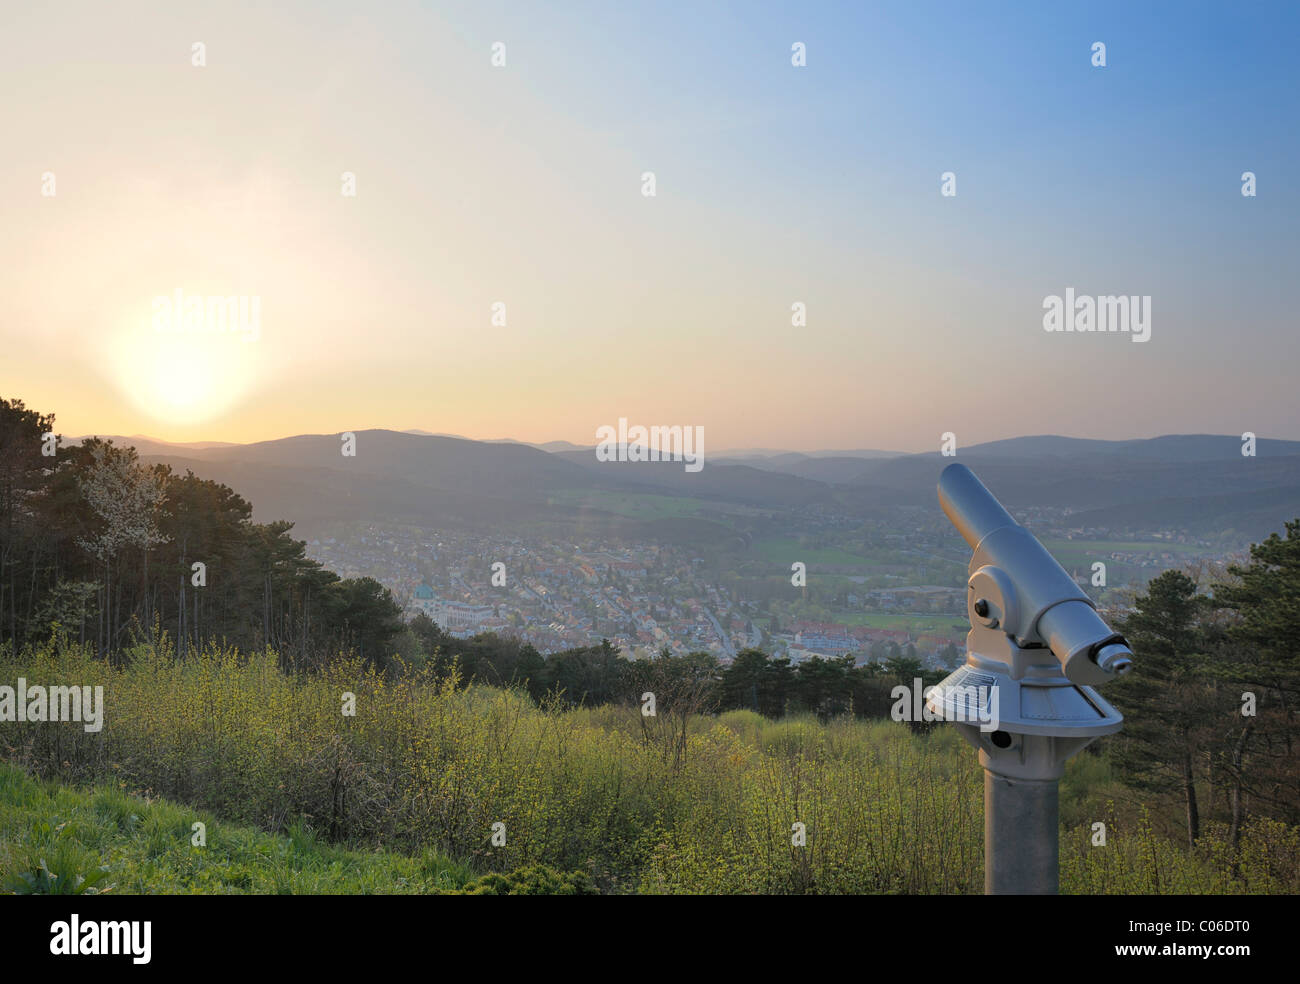 Coin-operated telescope overlooking Berndorf, Guglzipf lookout, Triestingtal valley, Lower Austria, Austria, Europe Stock Photo